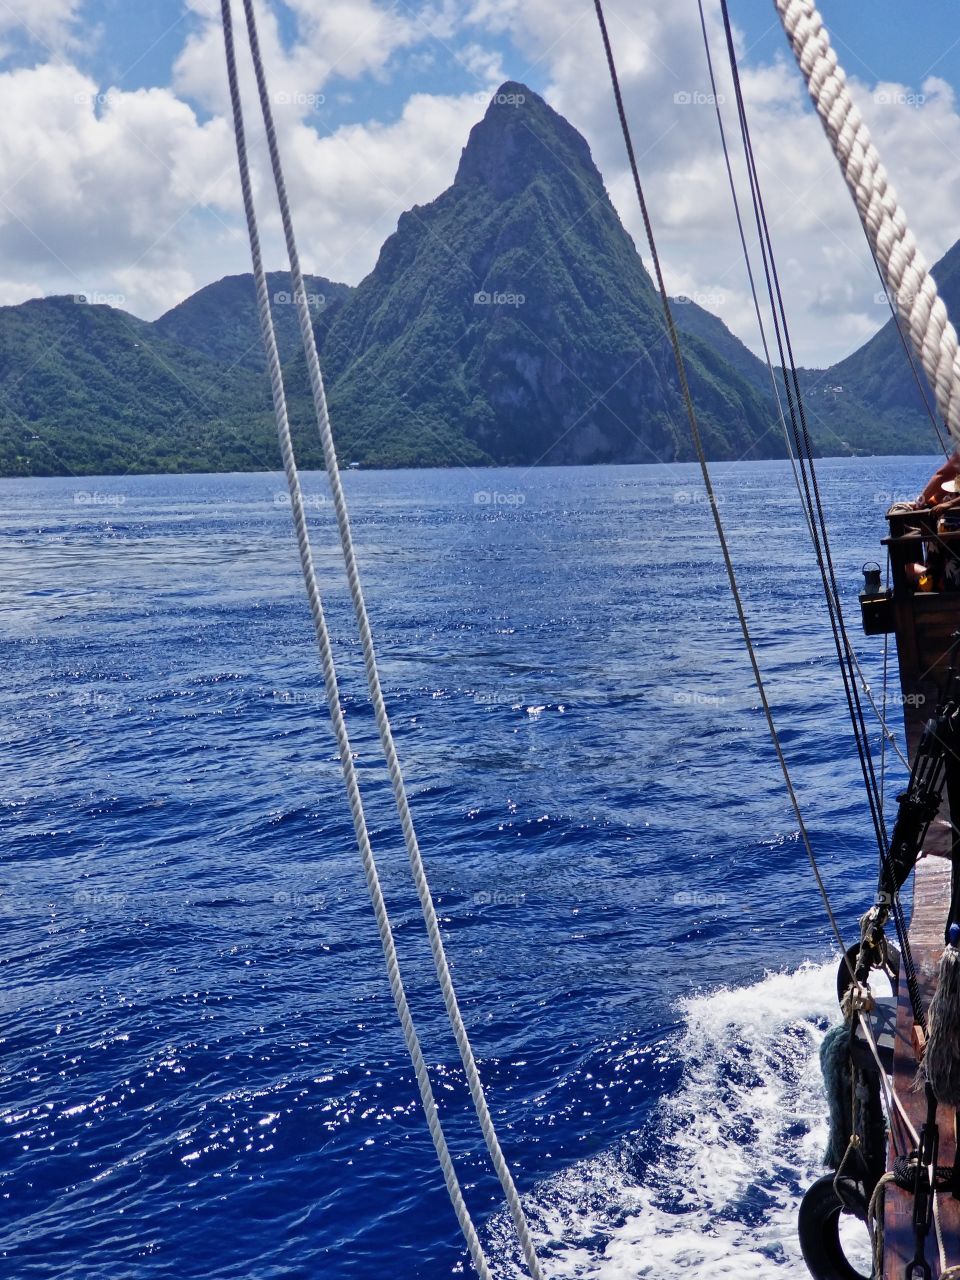 Spanish Galleon heading towards Pitons in St Lucia